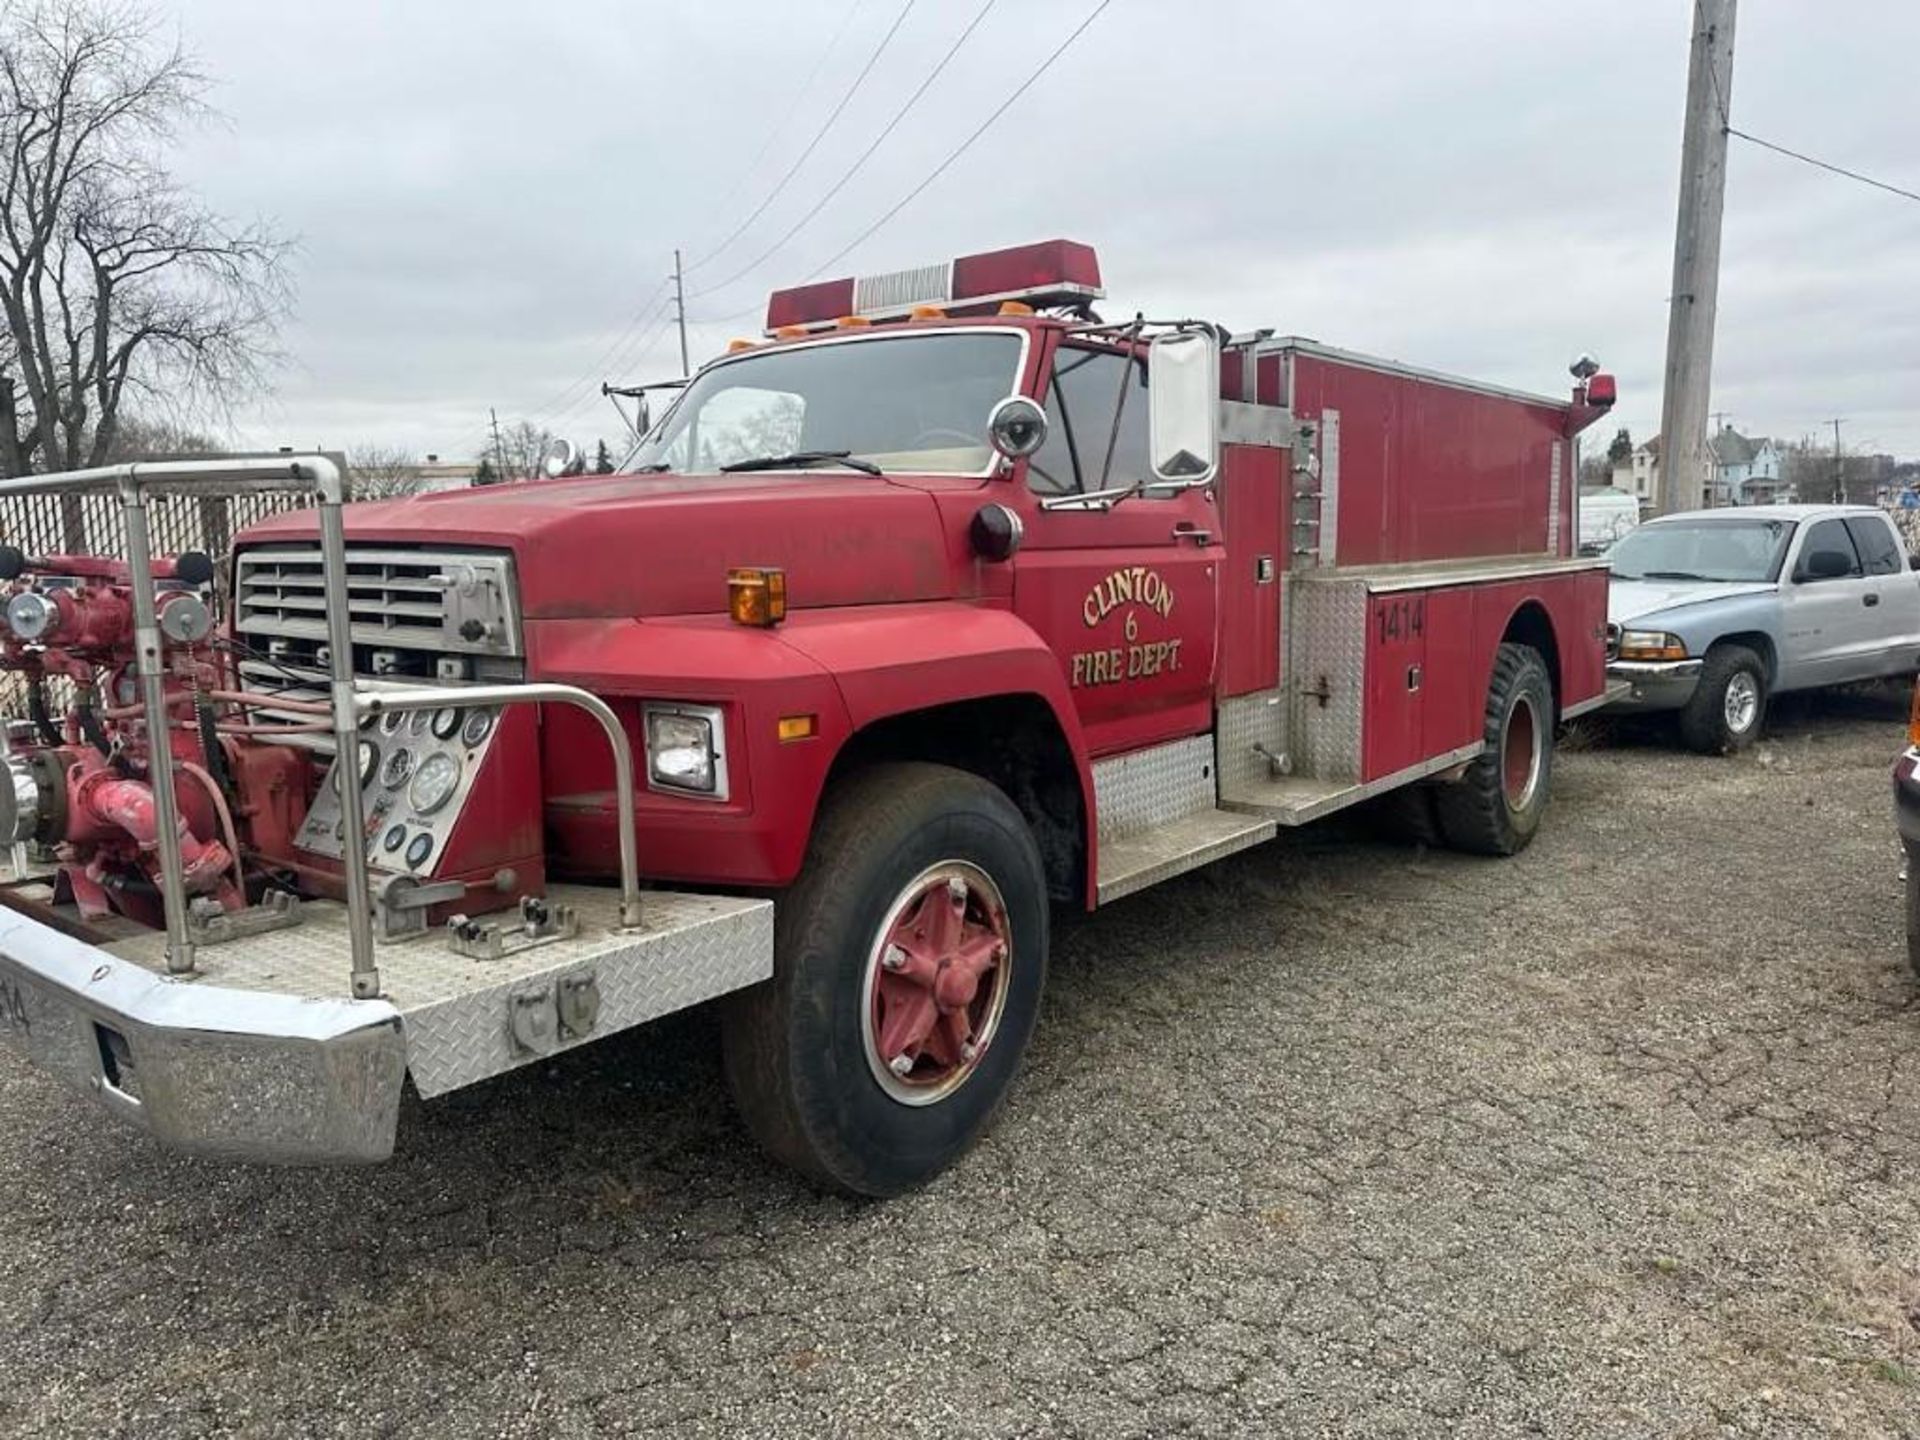 1980 Ford Fire Truck (located off-site, please read description) - Image 2 of 19